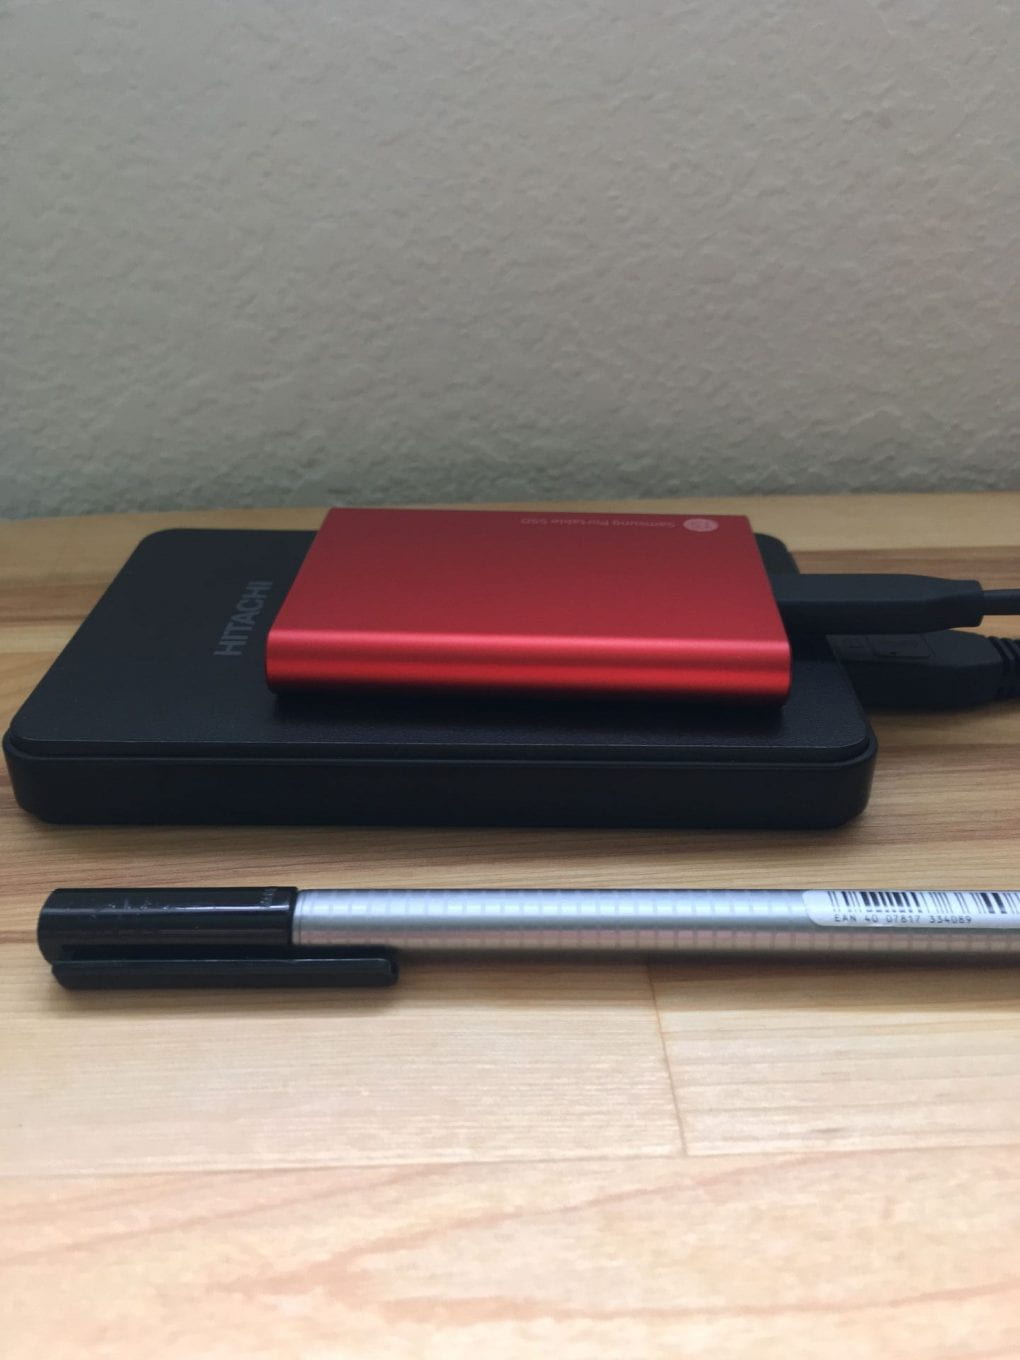 Stacked on top of eachother. On table a pen, Bottom a black spinning disk external HDD, top bright red sold state HDD